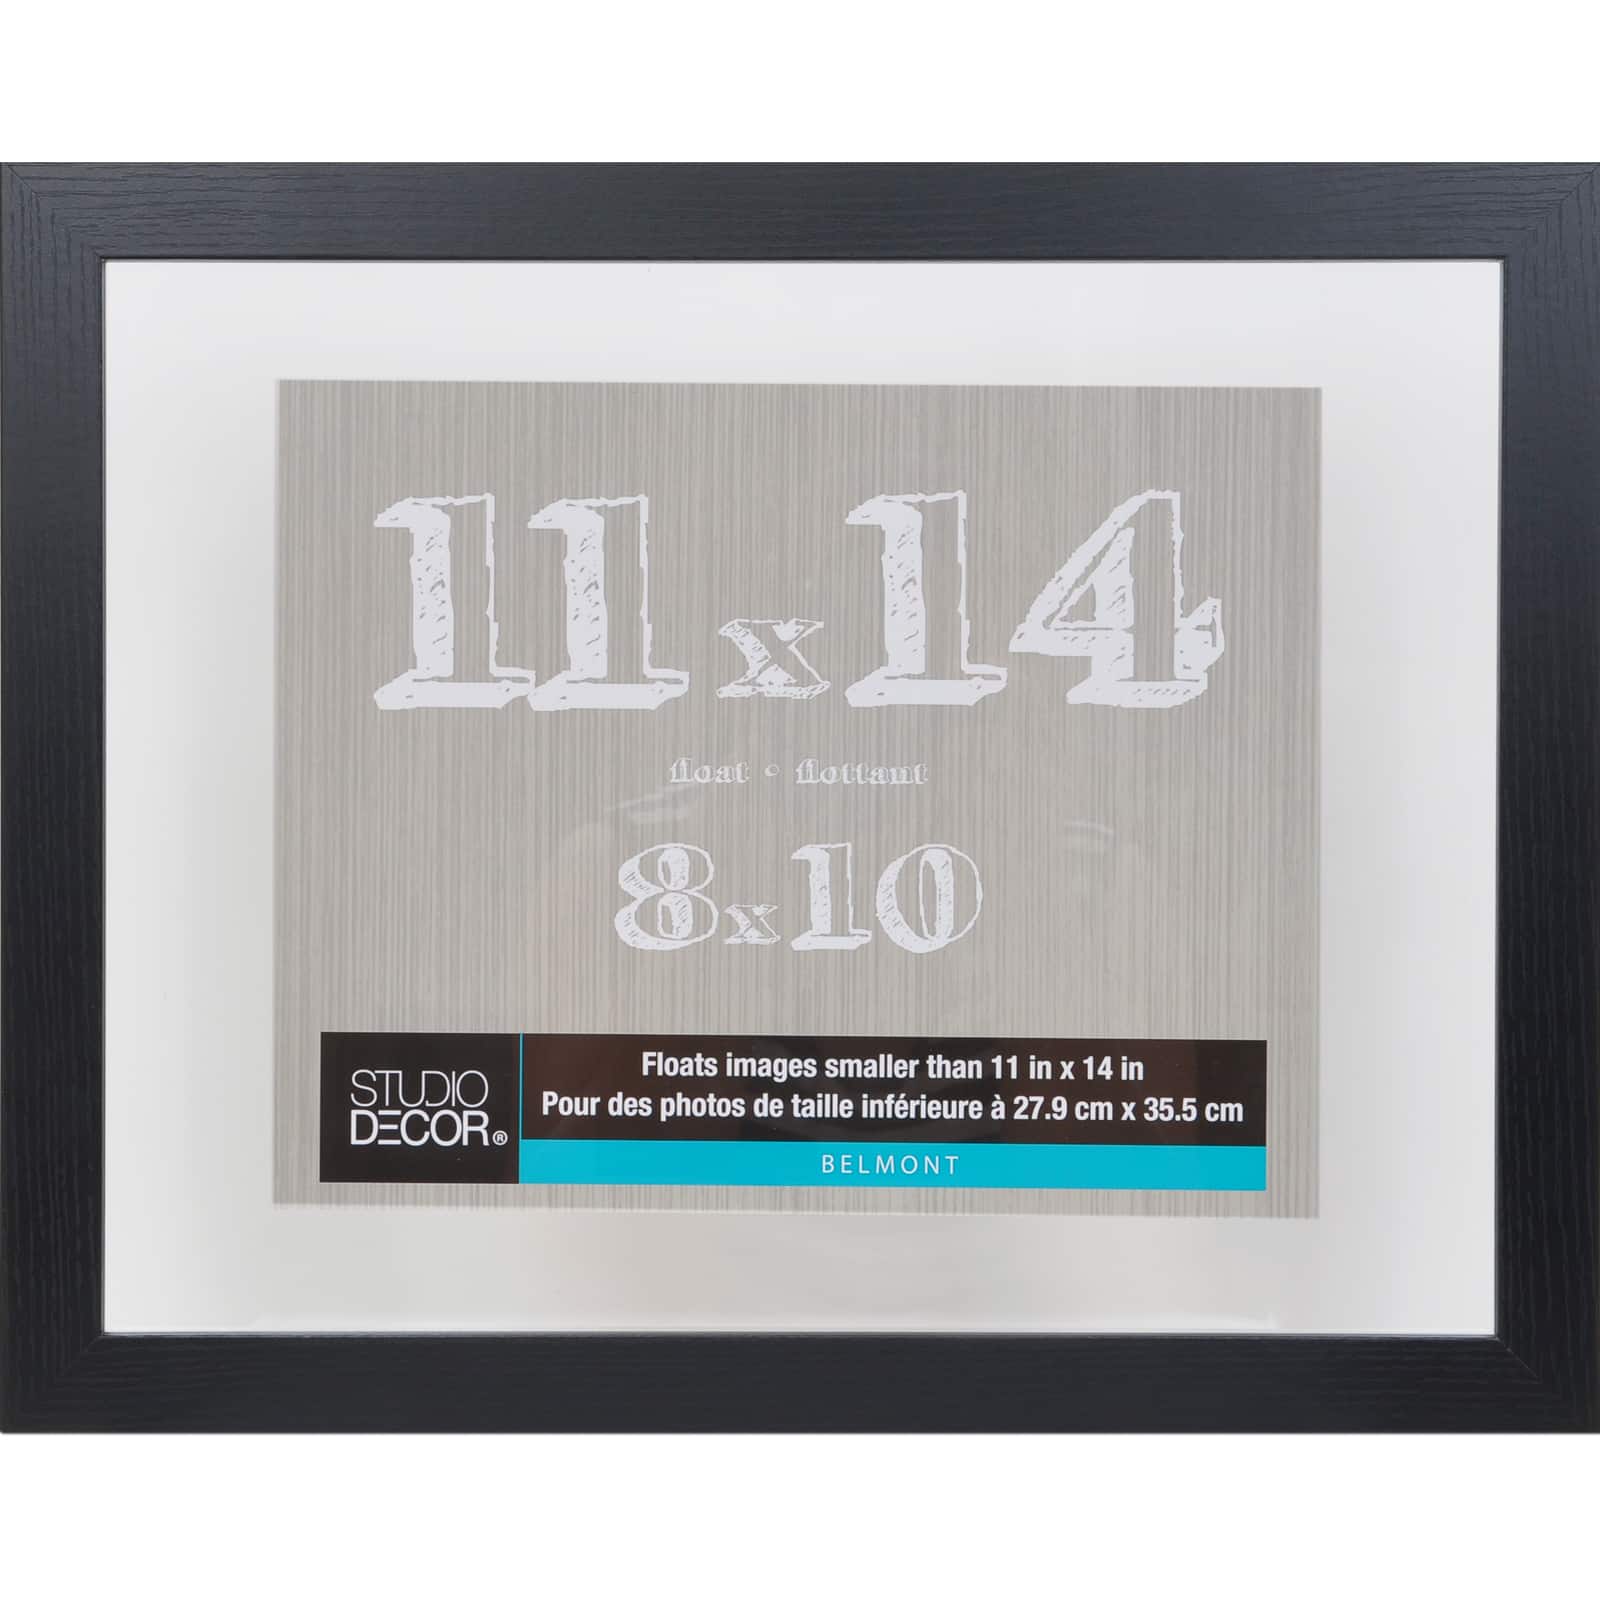  Malden 16x20 Floating Glass Picture Frame, Made to Display  11x14 Floating Picture, 16x20 Glass Size, Black - Luxury Frames